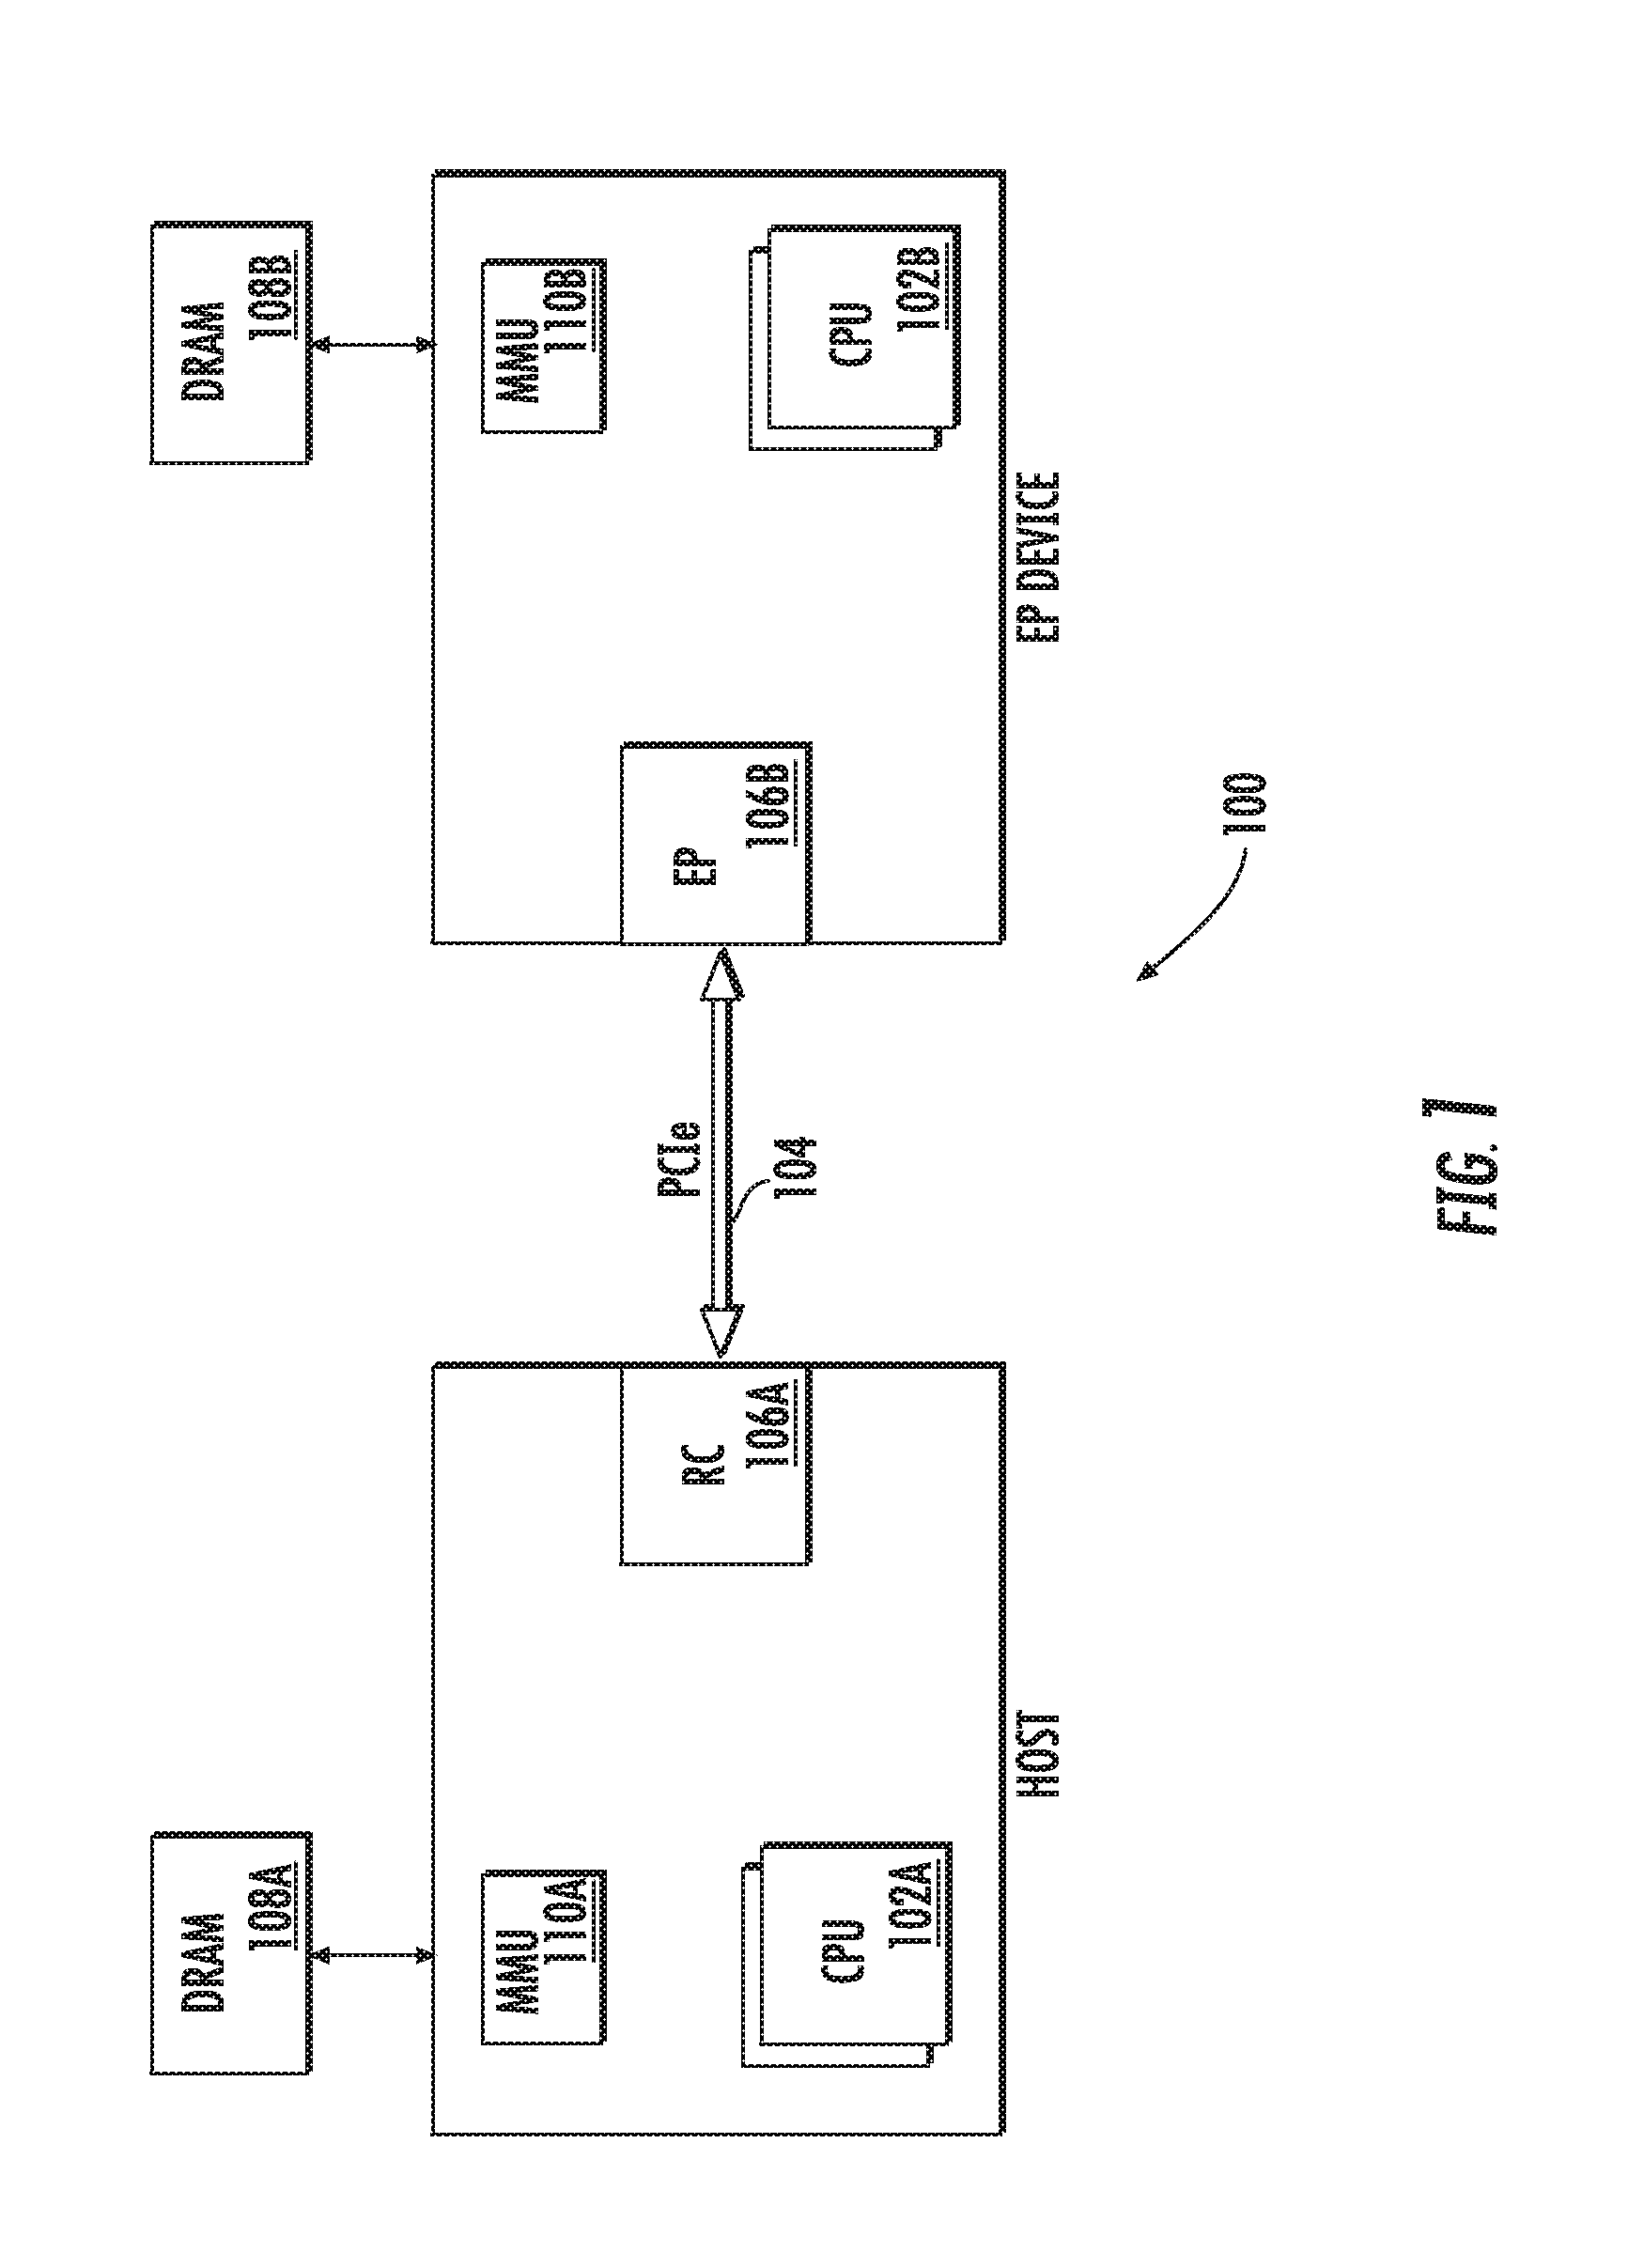 Methods and apparatus for recovering errors with an inter-processor communication link between independently operable processors